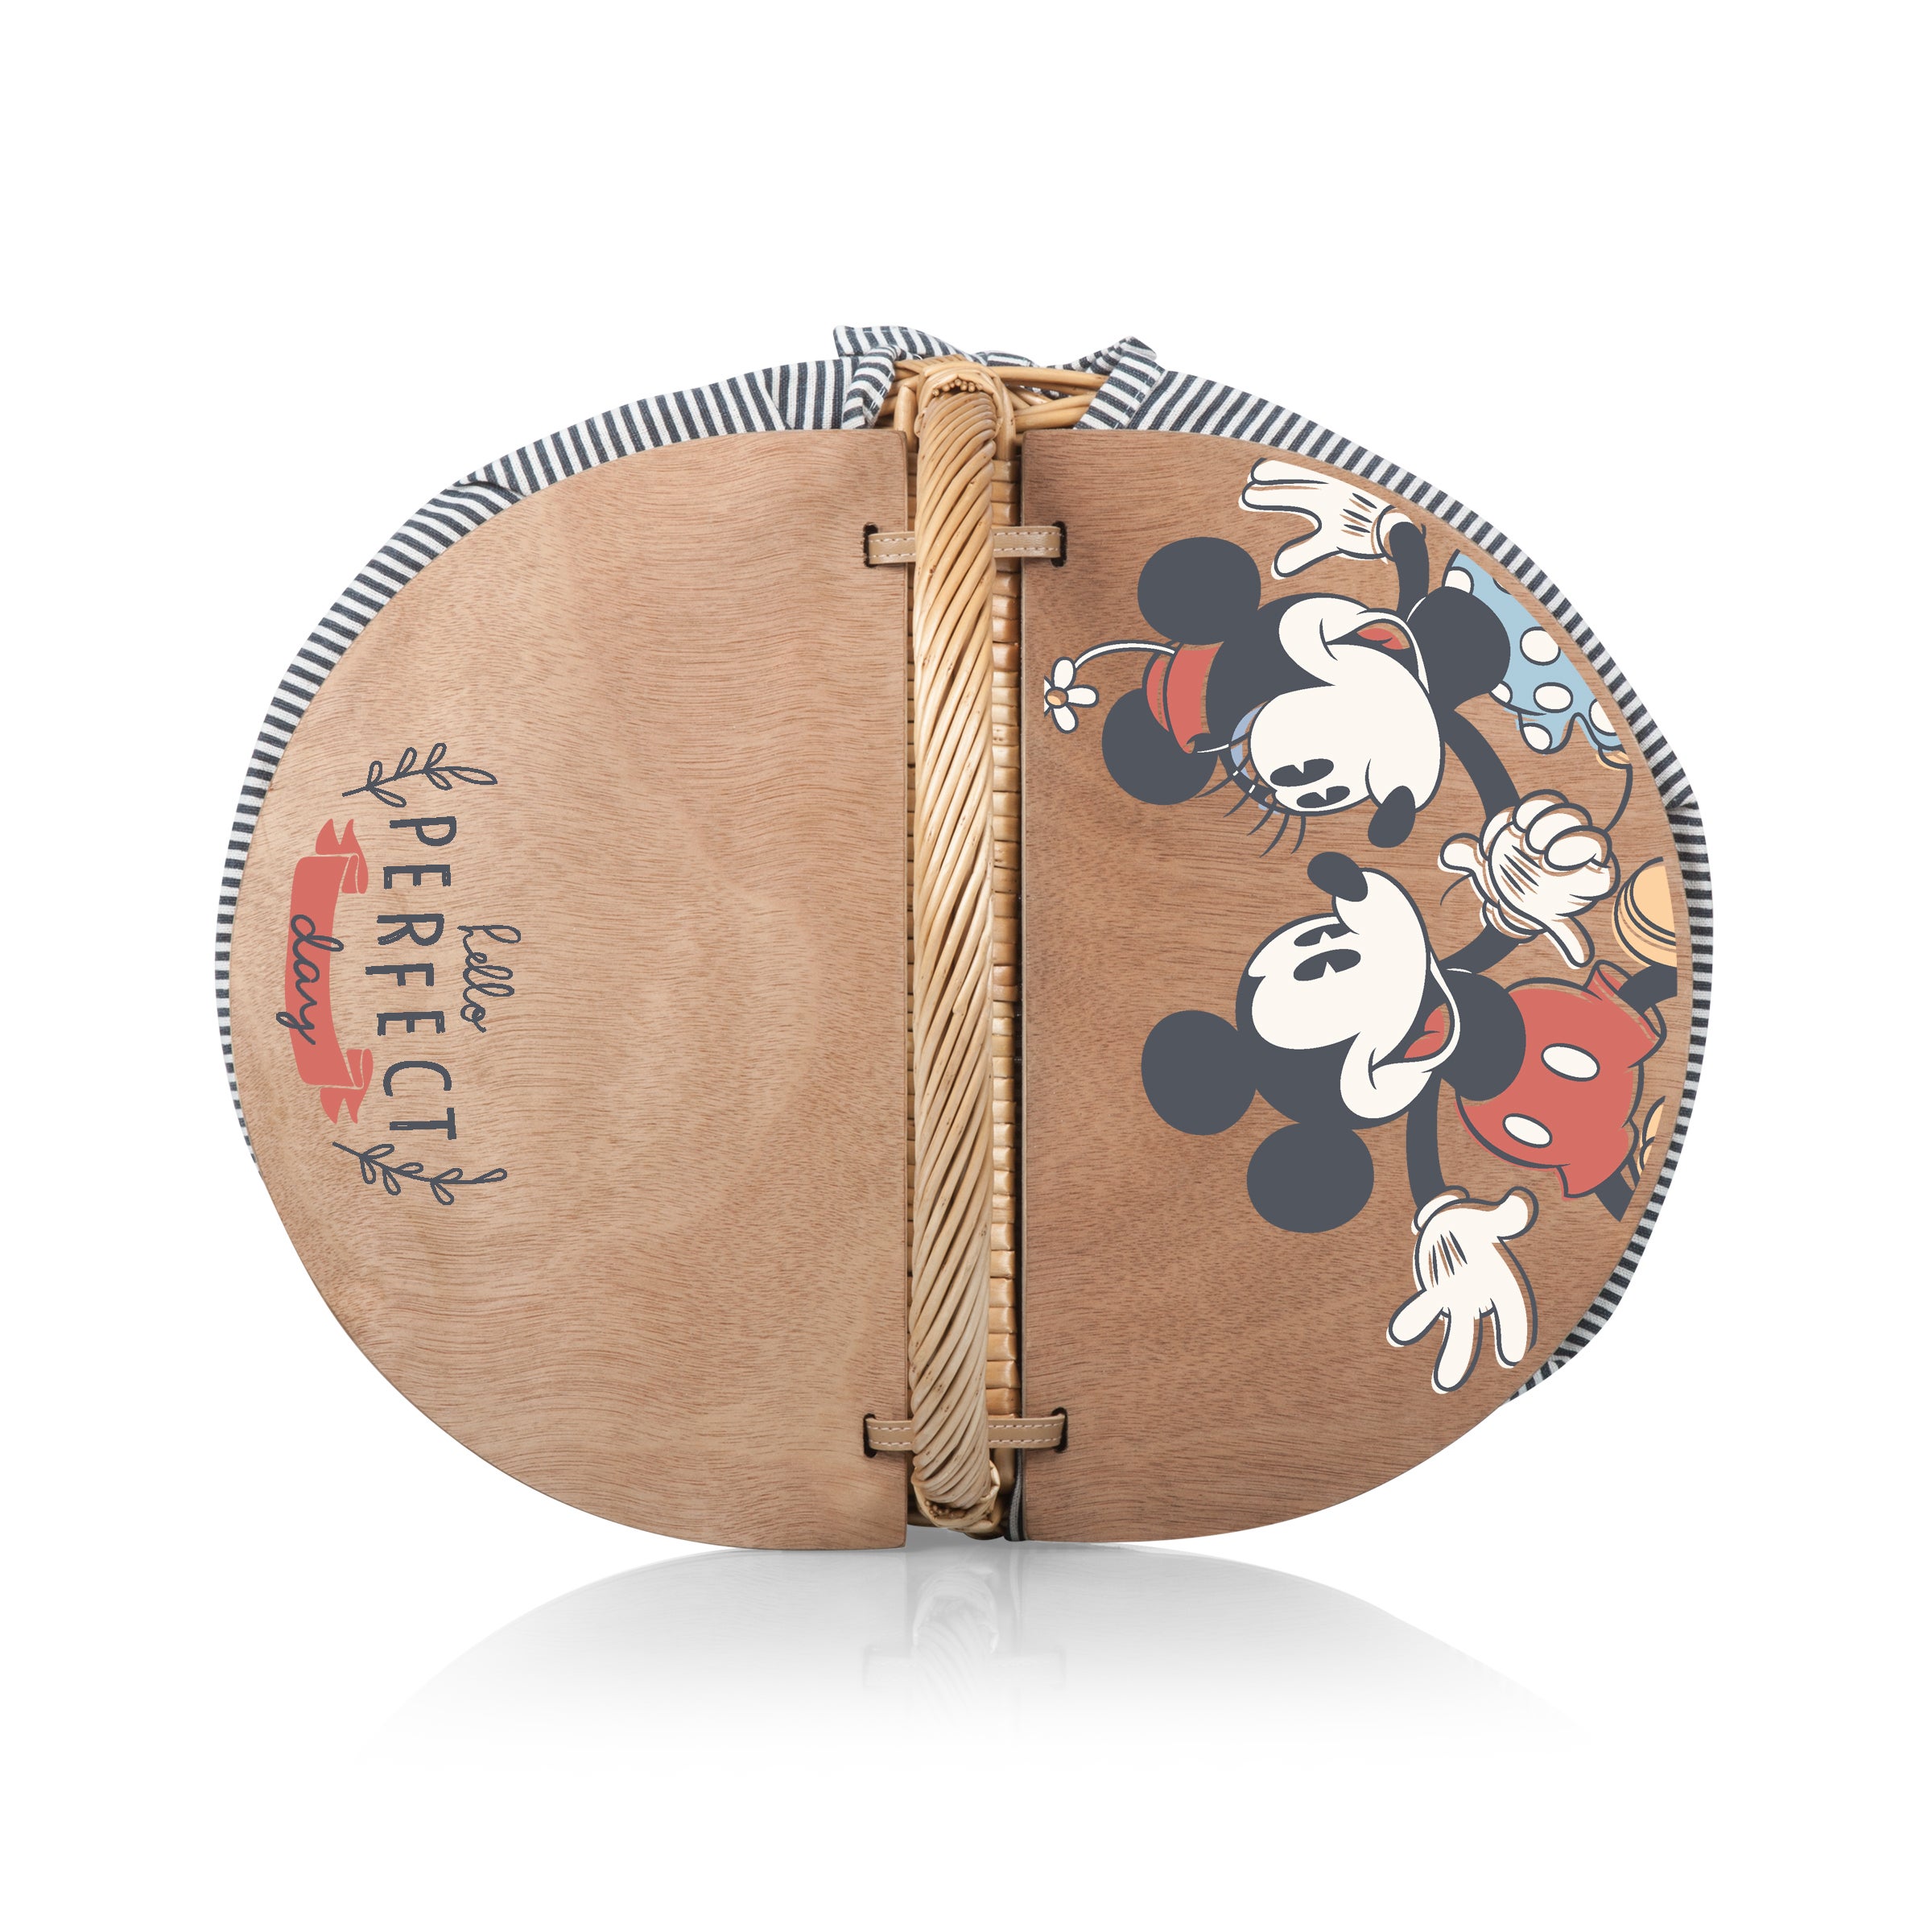 Mickey And Minnie Country Picnic Basket